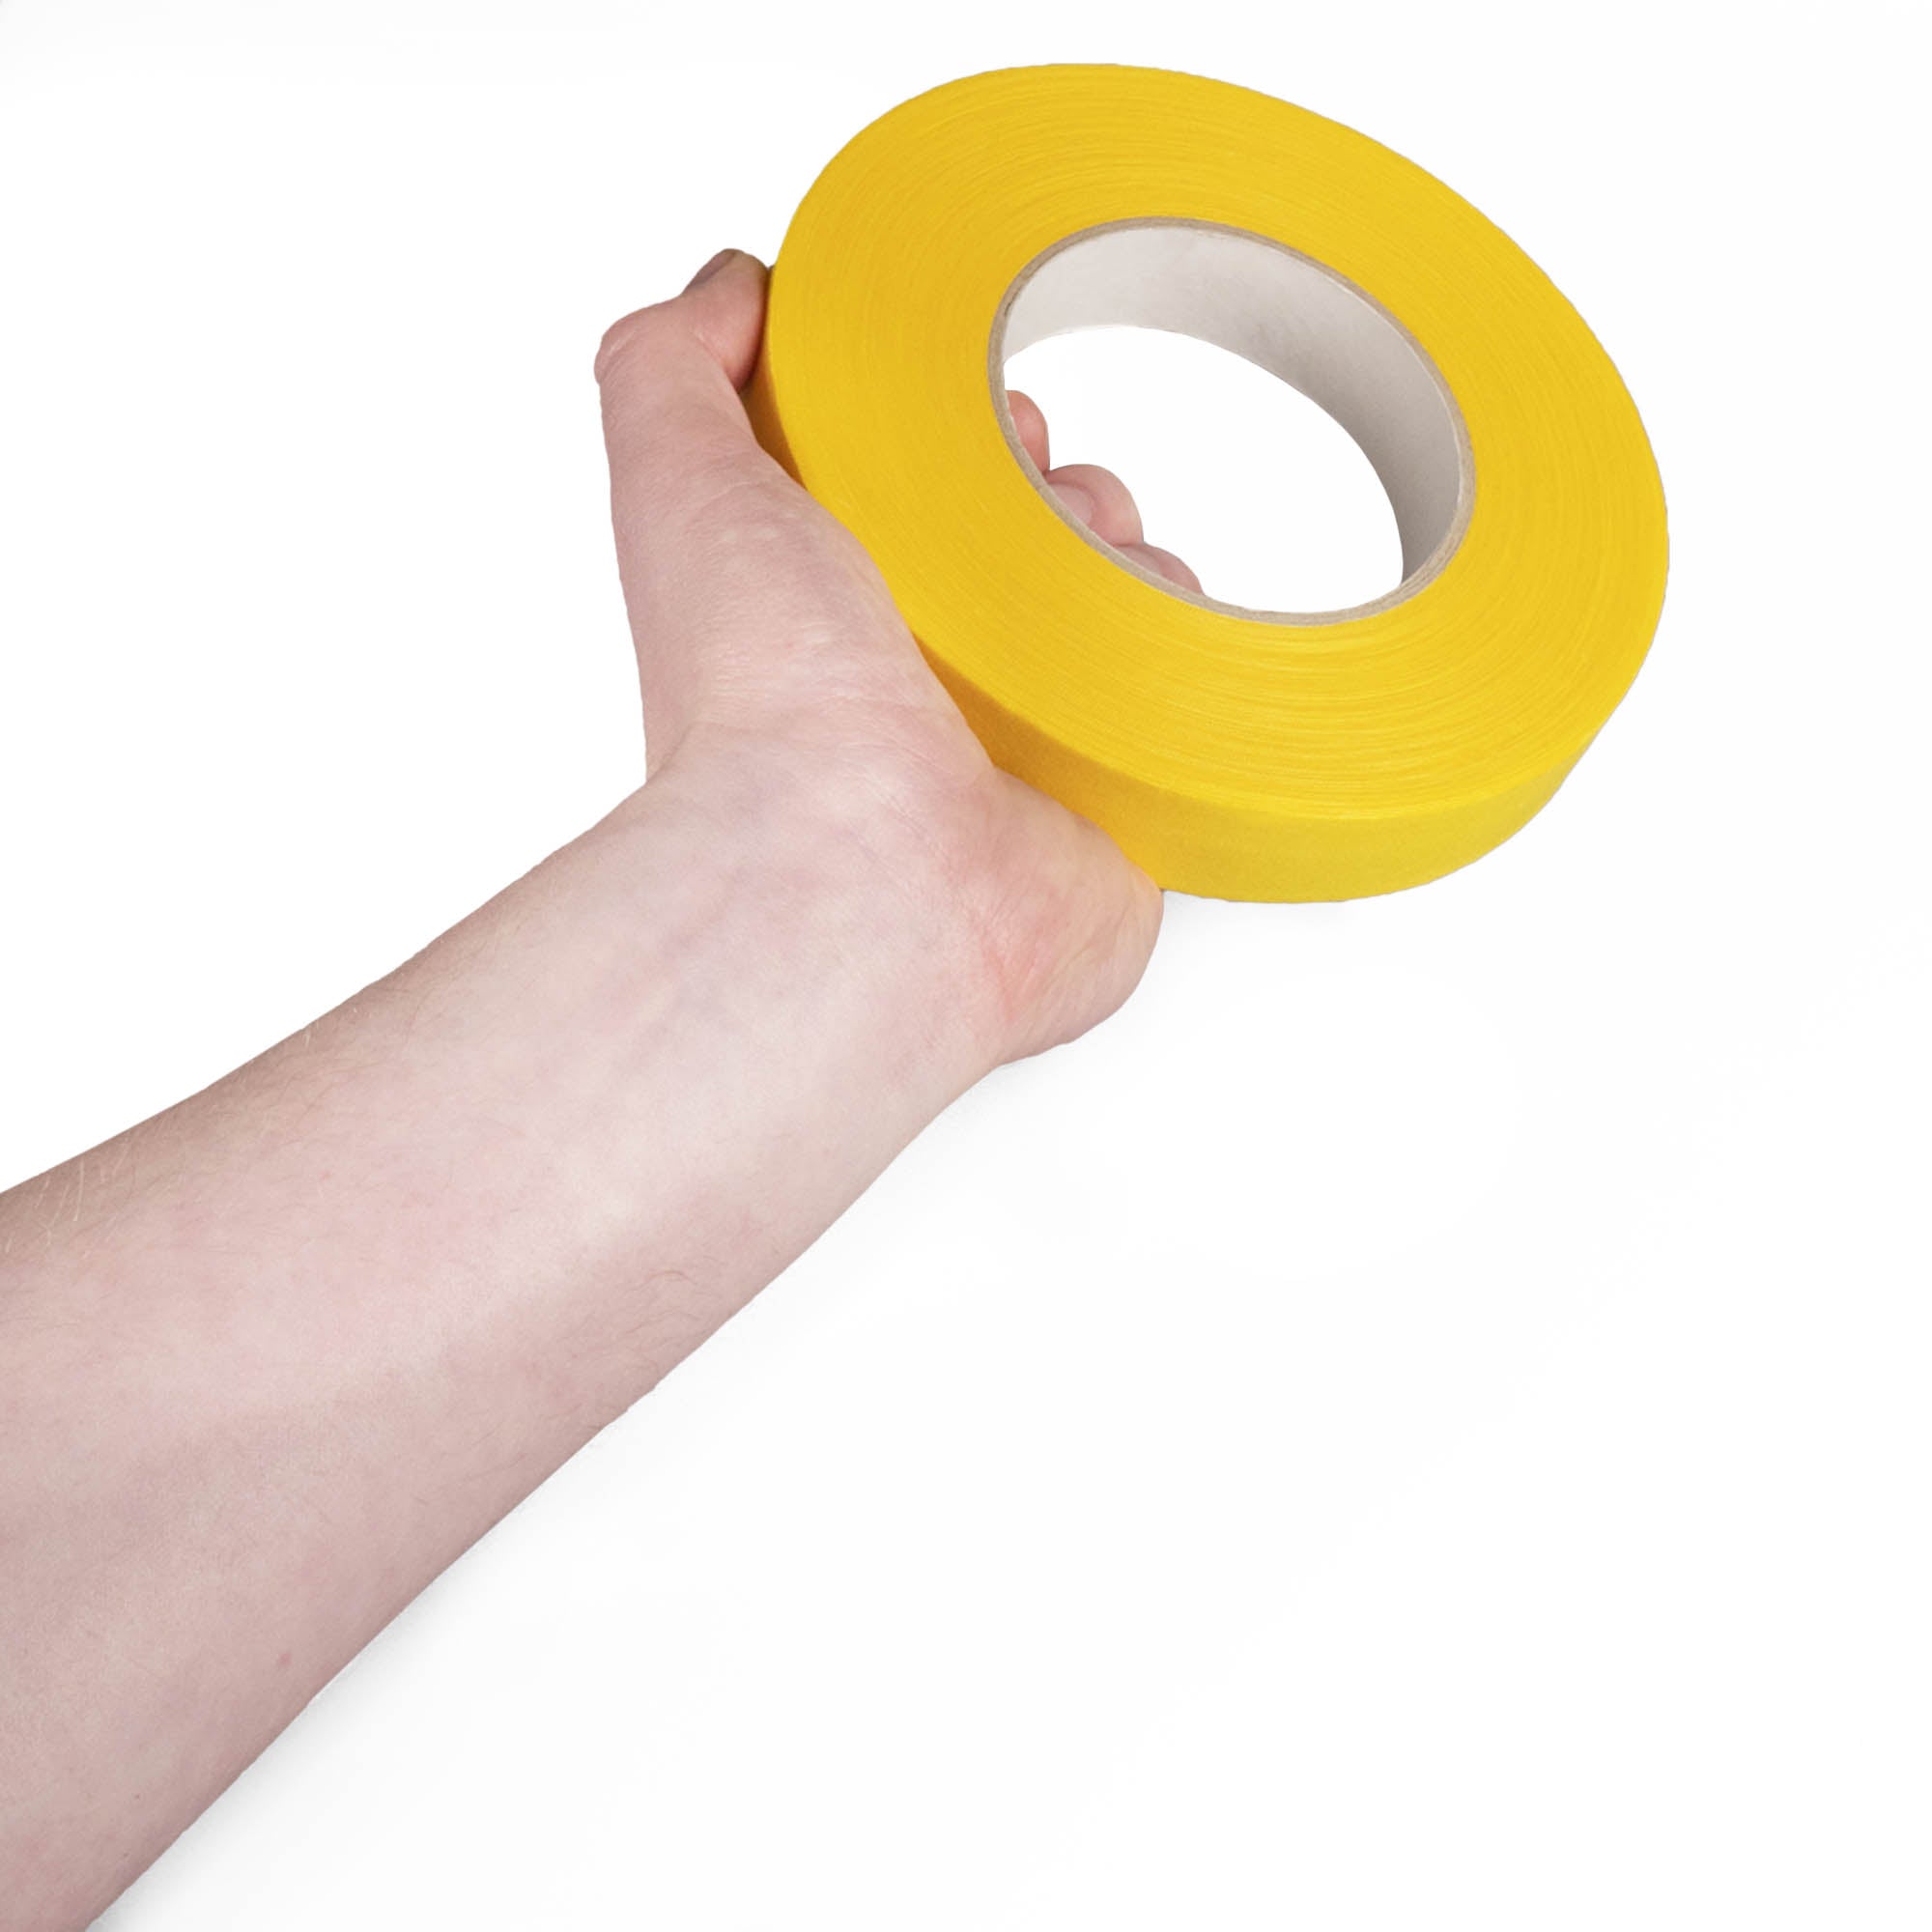 yellow 2.5cm wide tape in hand